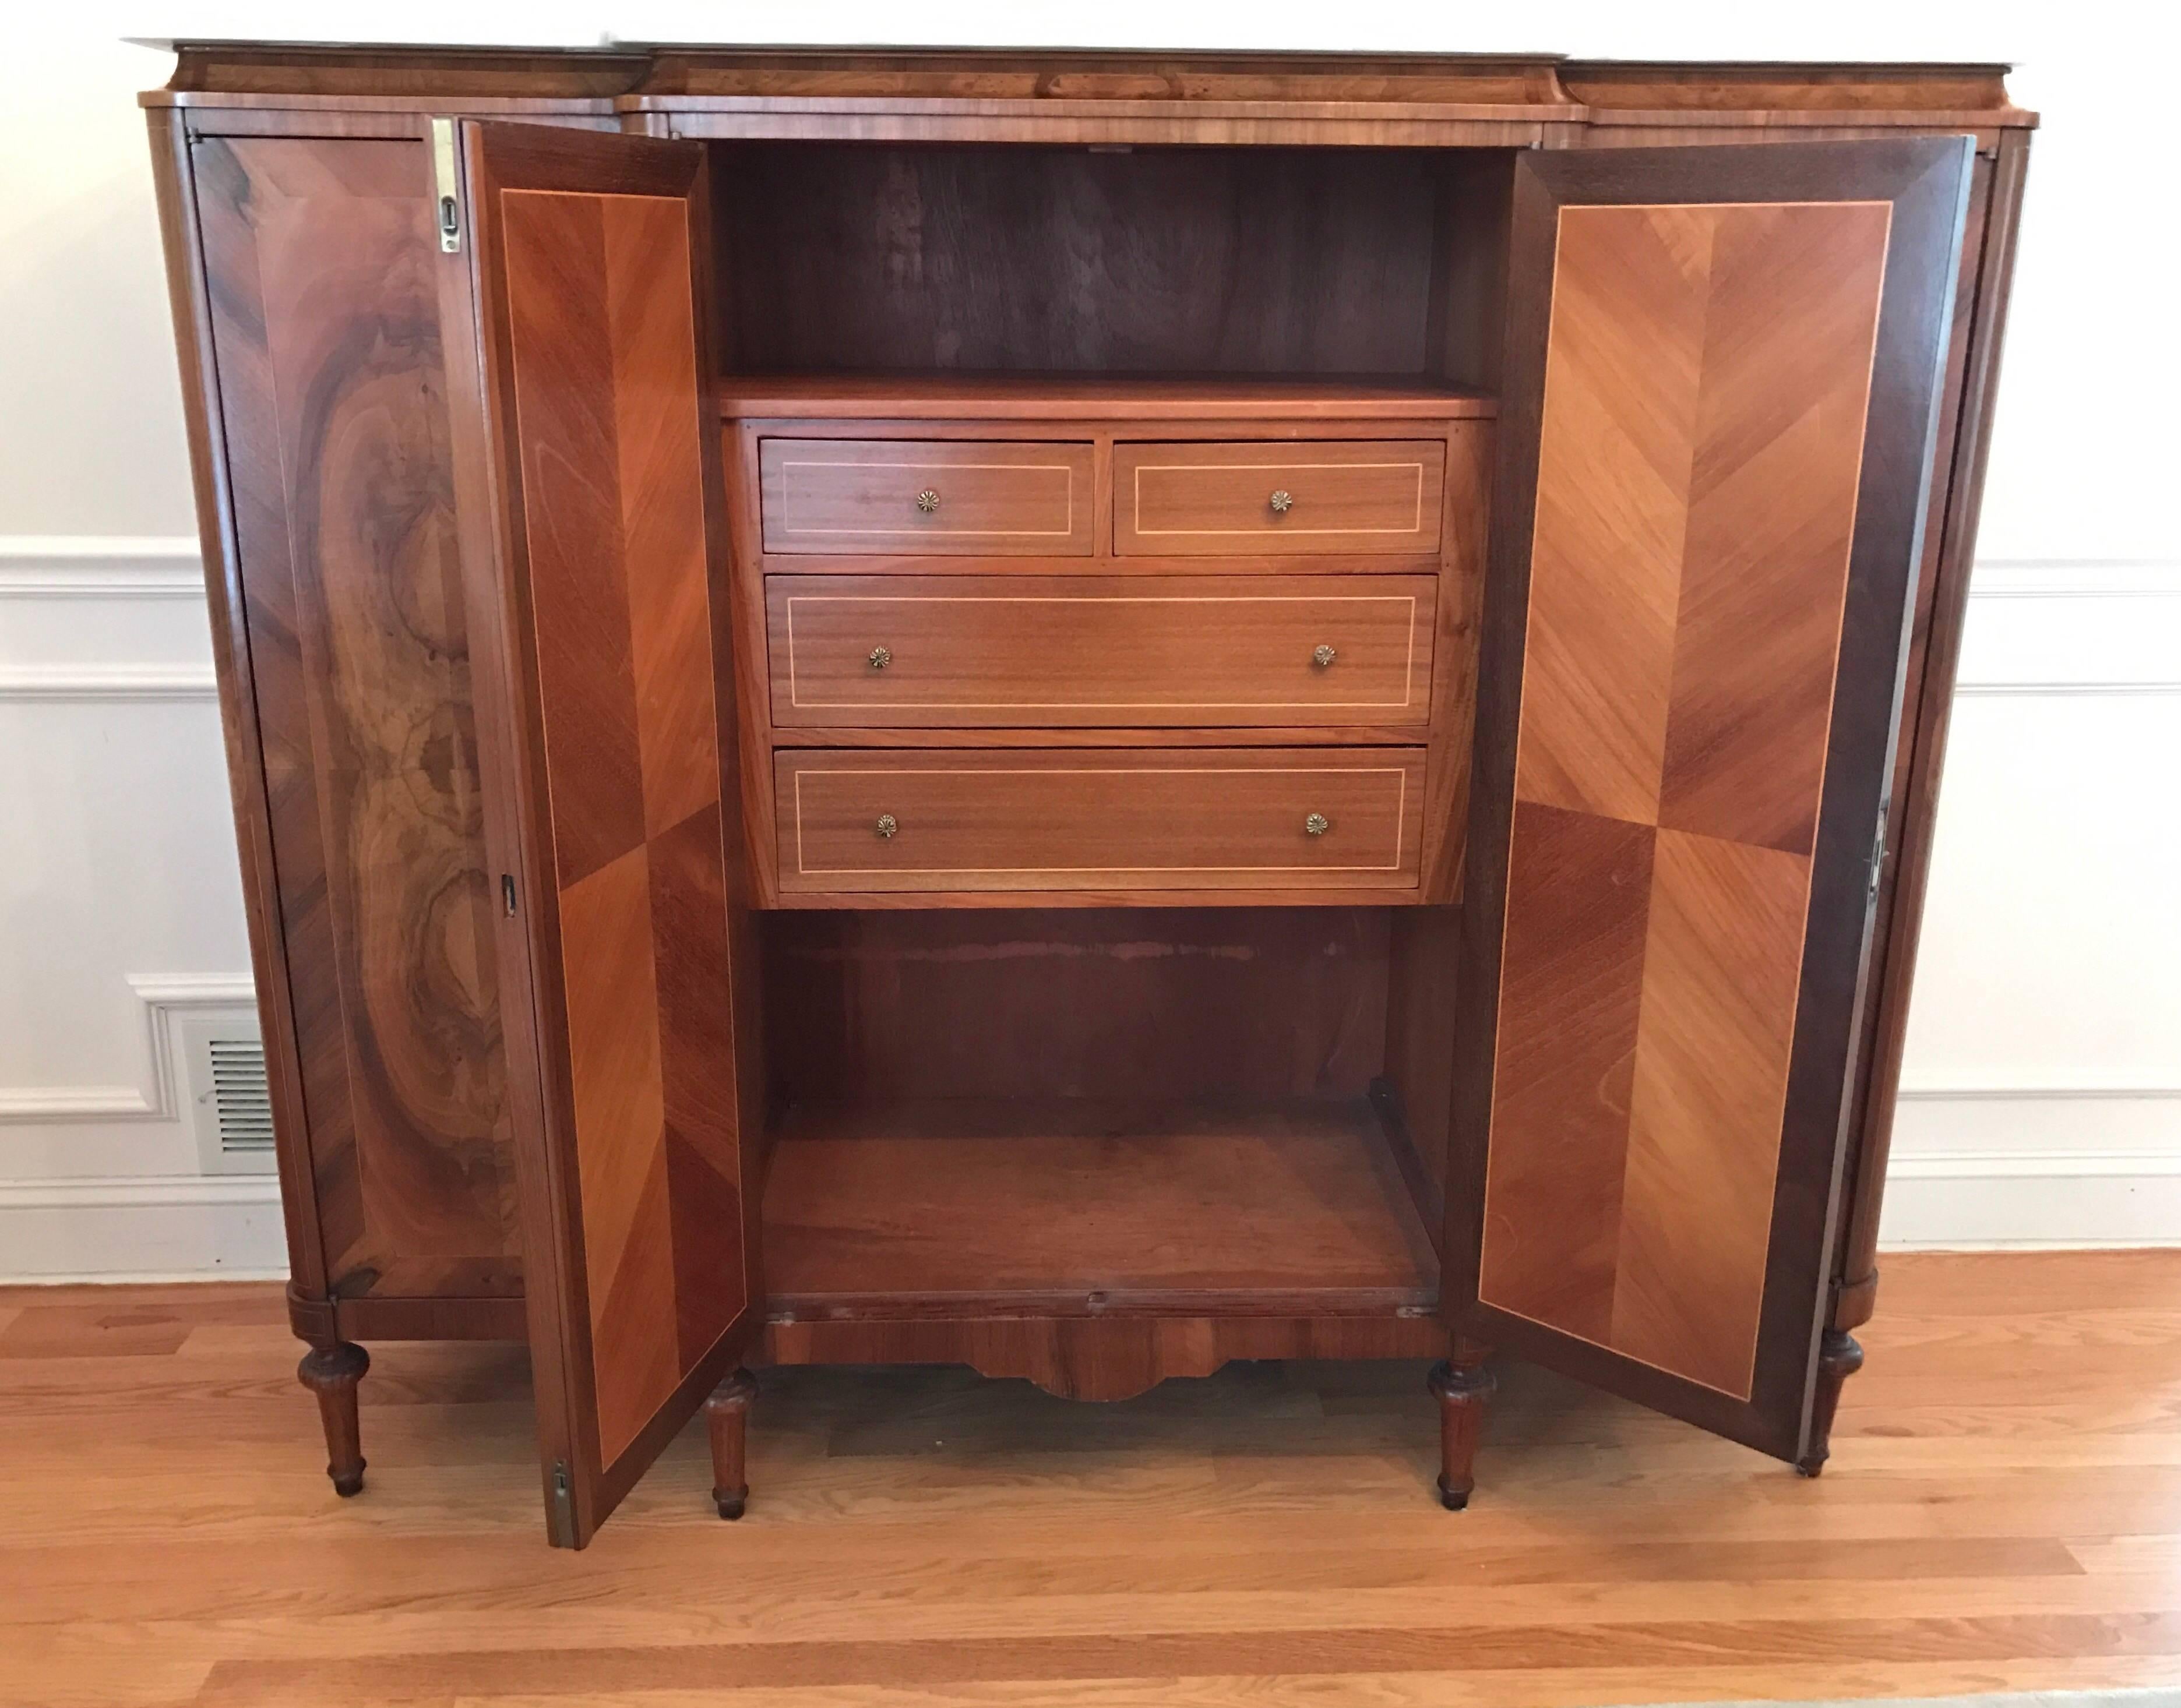 In the style of Mercier Freres, this 1920s, French piece can function as a cabinet, credenza or sideboard. The crotch mahogany is absolutely beautiful and covers the front doors and sides. All three doors have working lock and keys. It is tall, but